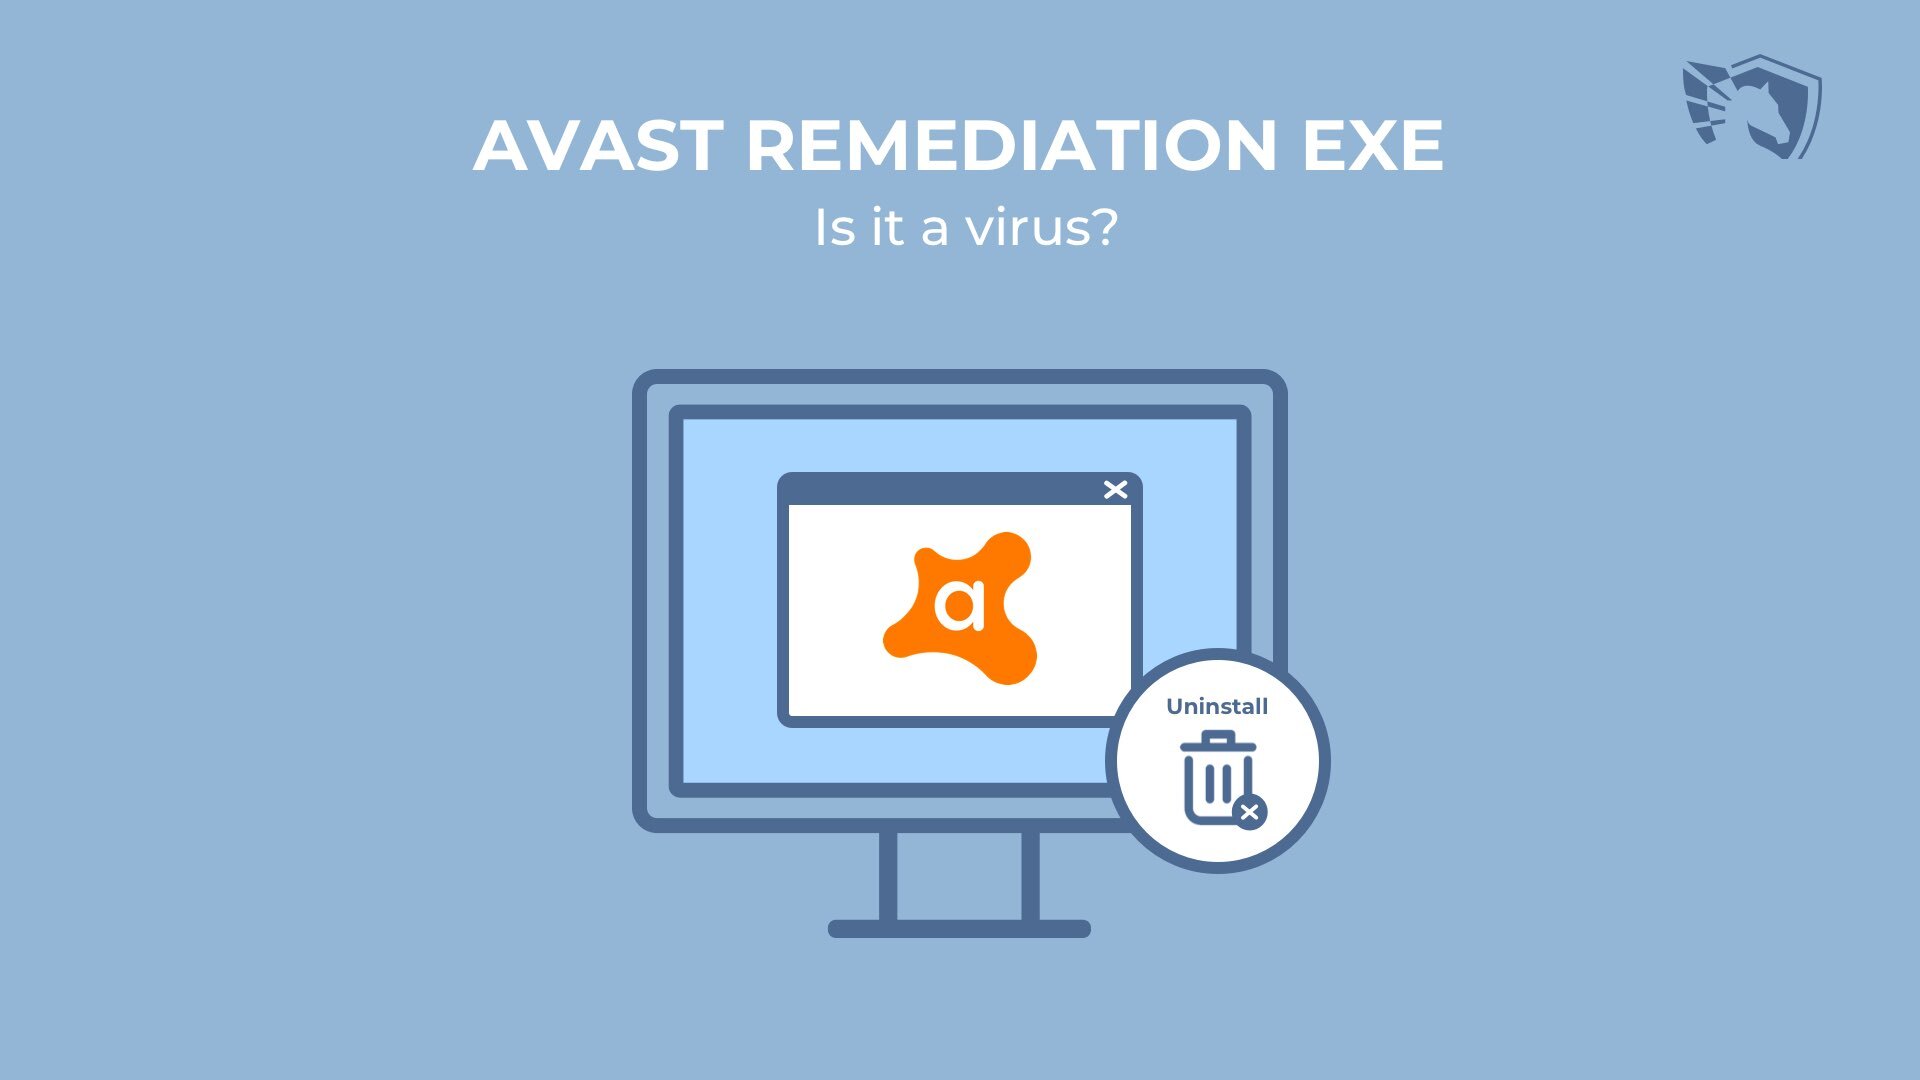 Avast Remediation Exe. Is it a Virus?